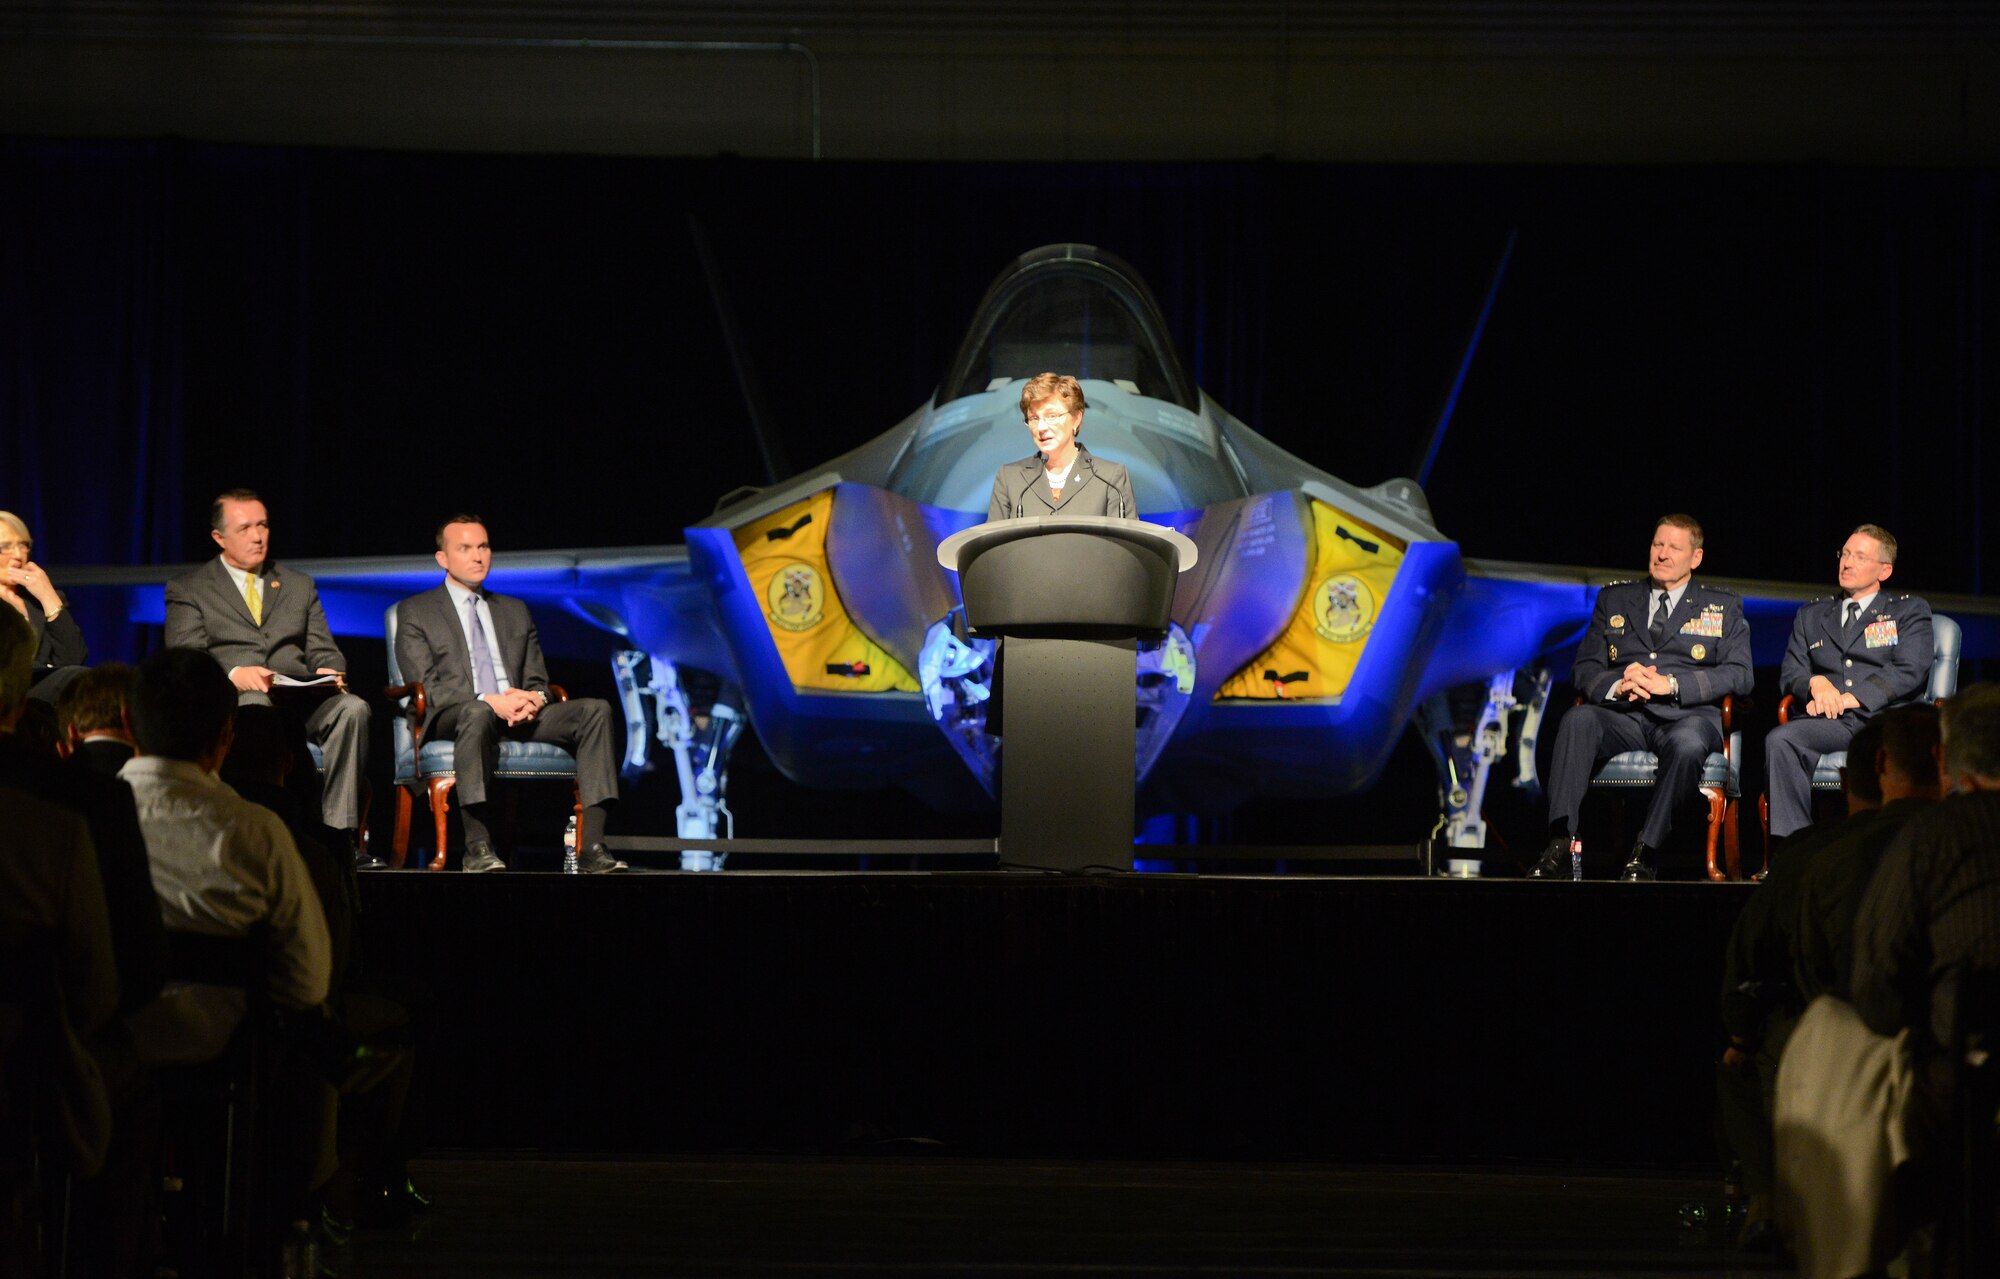 Lorraine Martin, vice president and general manager of the F-35 program for Lockheed Martin, addresses an audience of approximately 500 community leaders, elected officials, representatives from partner nation air forces and Luke Airmen during an unveiling ceremony on March 14 at Luke Air Force Base for the 56th Fighter Wing’s first F-35 Lightning II fighter jet. Martin was joined on stage by Arizona Governor Jan Brewer, Congressman Trent Franks, Undersecretary of the Air Force Eric Fanning, Brig. Gen. Mike Rothstein, 56th Fighter Wing commander, and Gen. Robin Rand, commander of Air Education and Training command. (U.S. Air Force photo by Senior Airman Devante Williams)